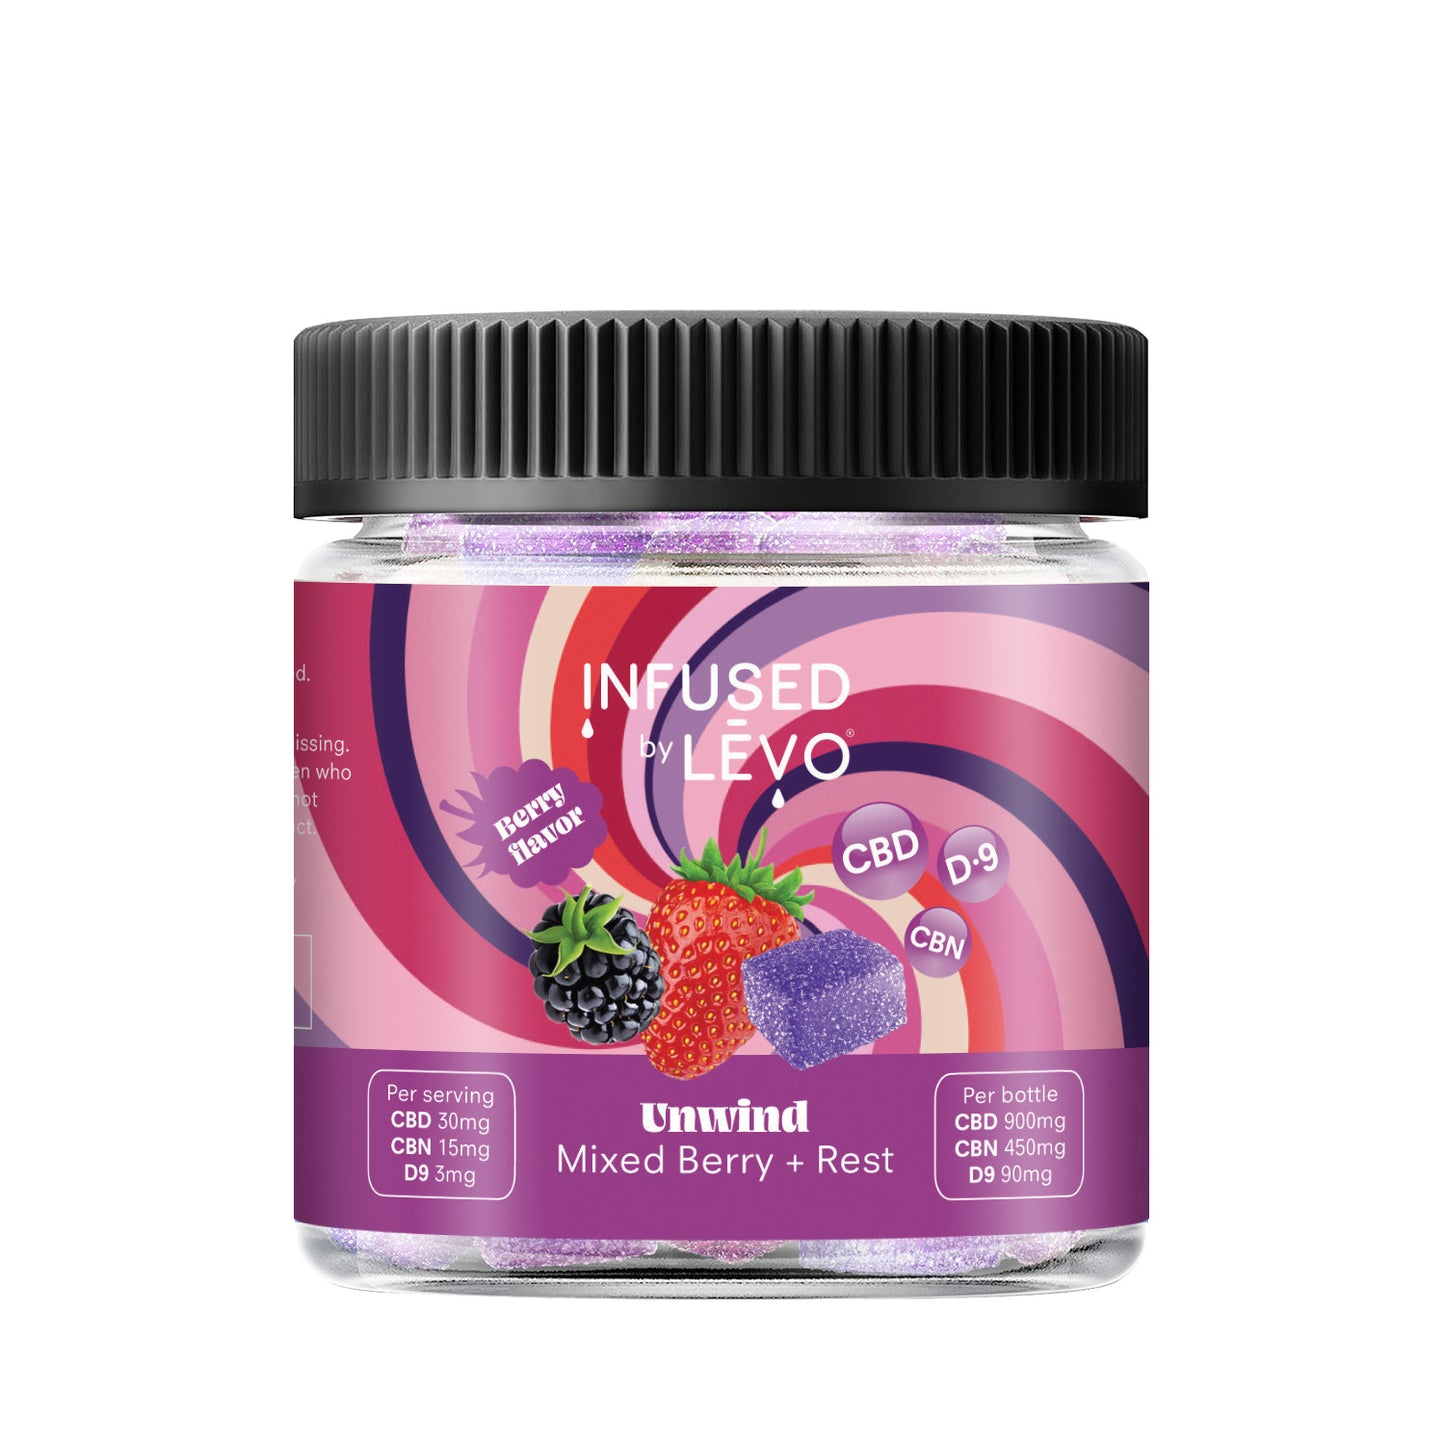 Infused by LEVO Unwind Gummies blackberry flavored for rest. One bottle of gummies.